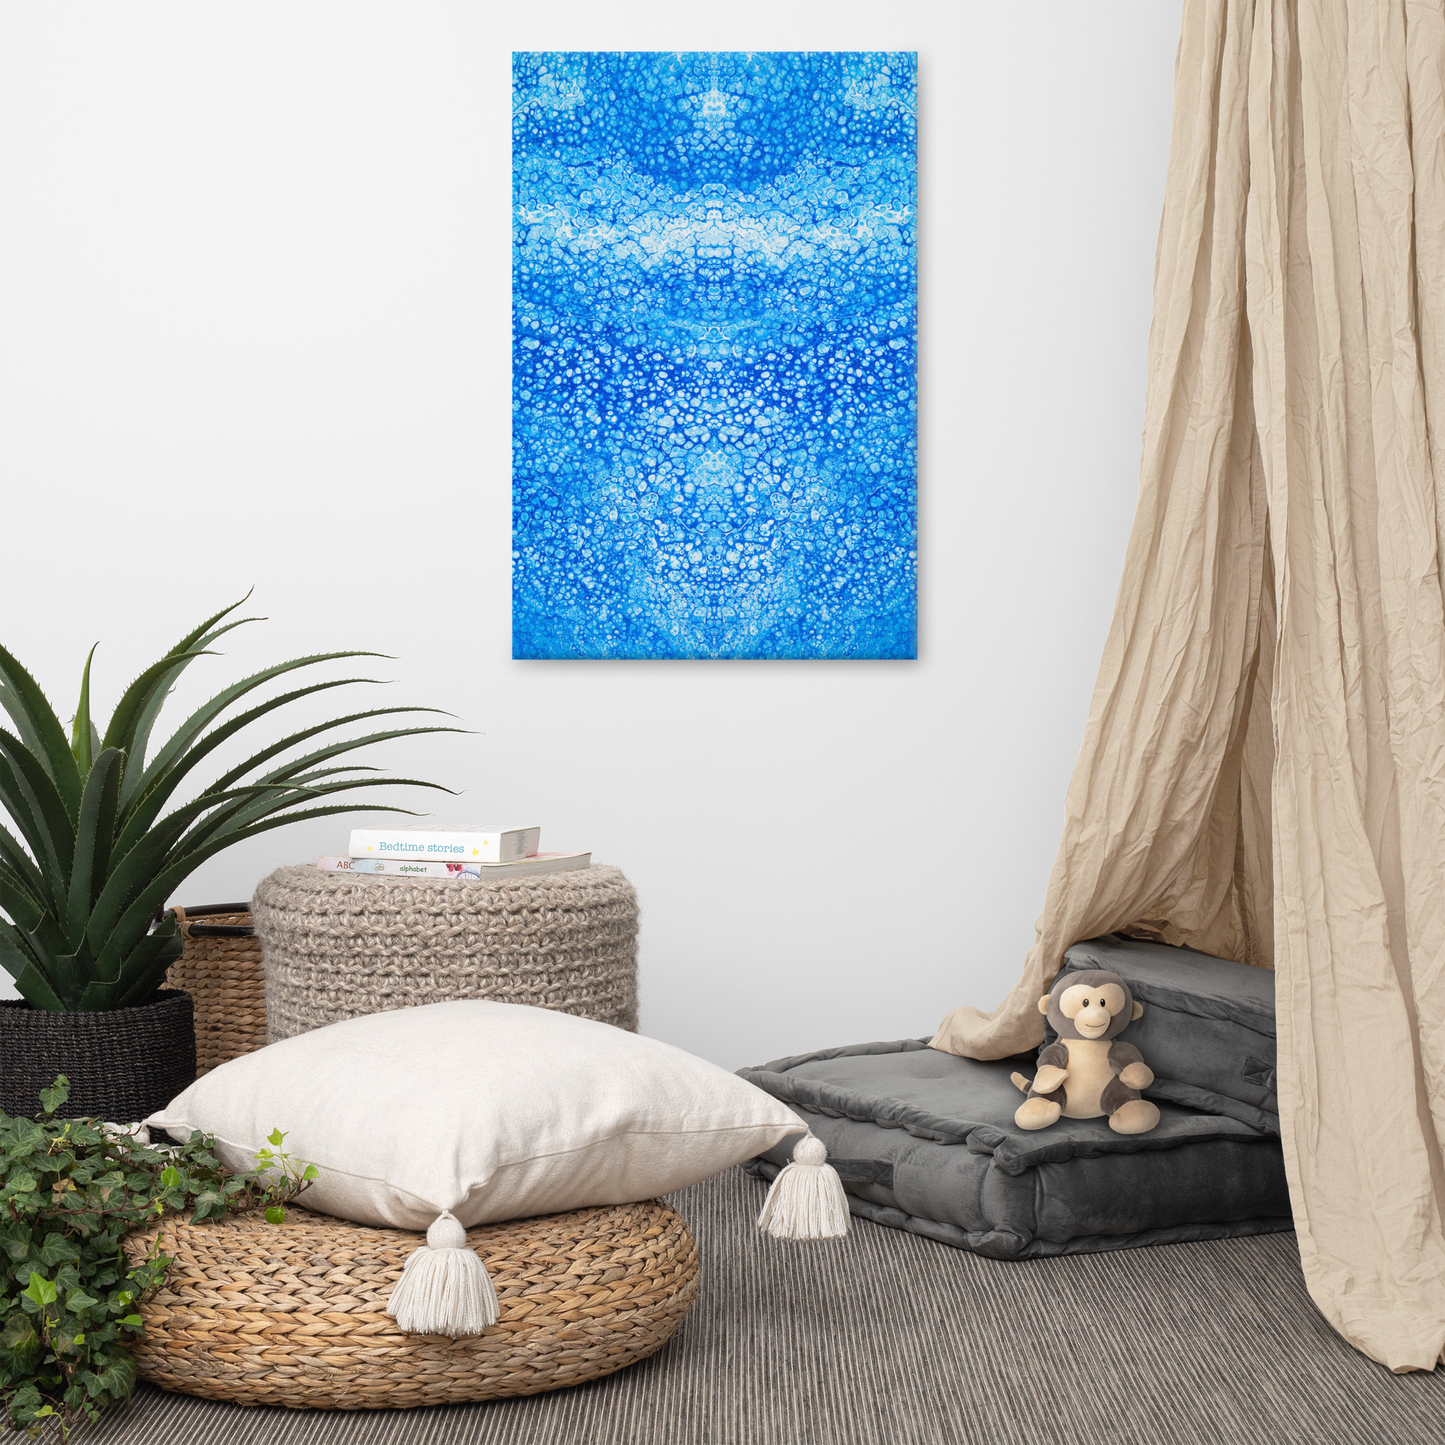 NightOwl Studio Abstract Wall Art, Cryptic Blue, Boho Living Room, Bedroom, Office, and Home Decor, Premium Canvas with Wooden Frame, Acrylic Painting Reproduction, 24” x 36”